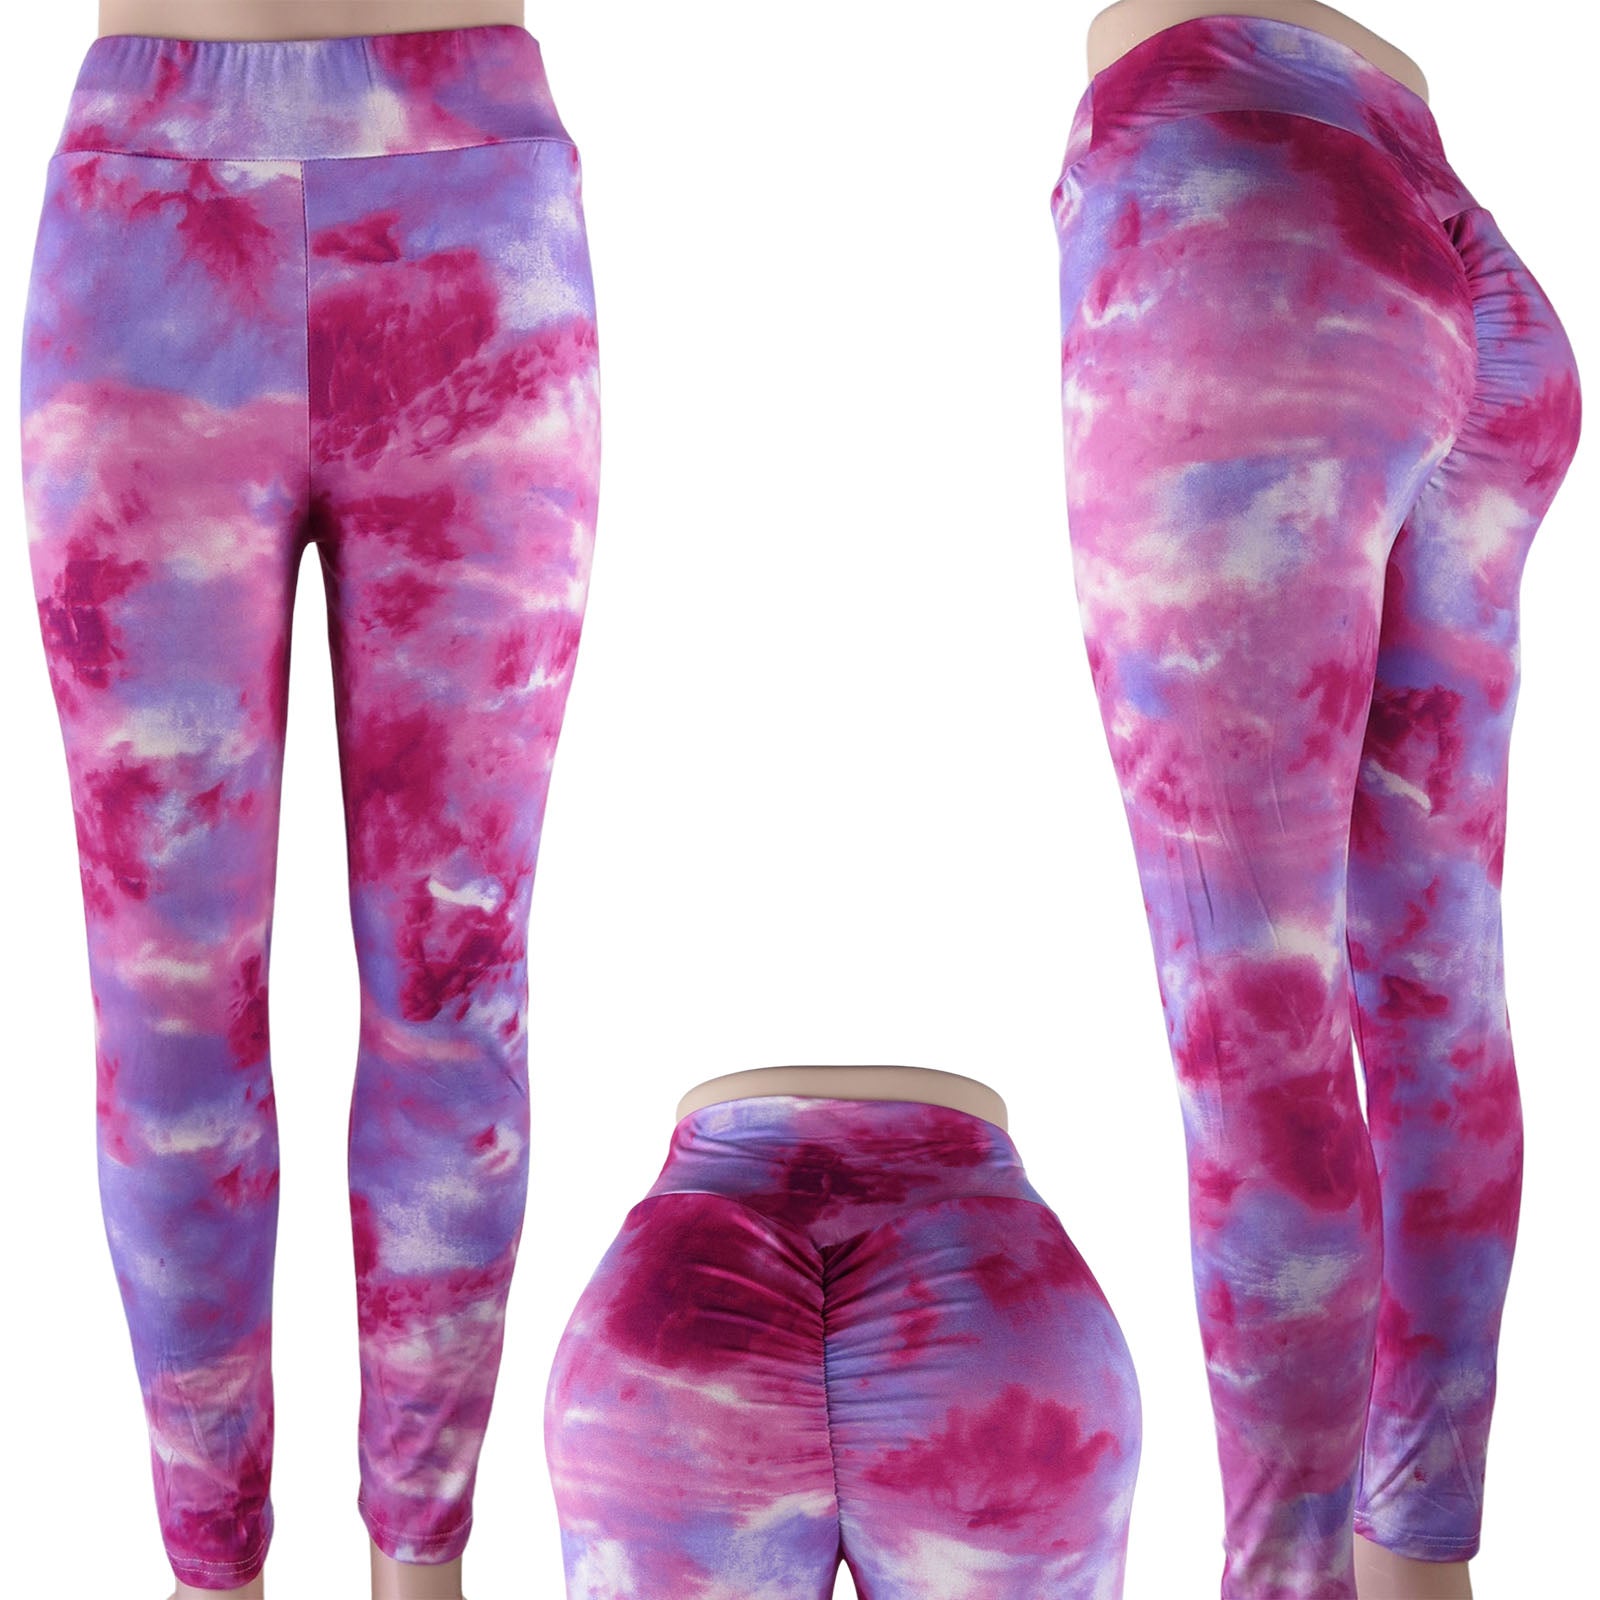 tie dye wholesale leggings with a scrunch butt and high waist in pink and purple blend